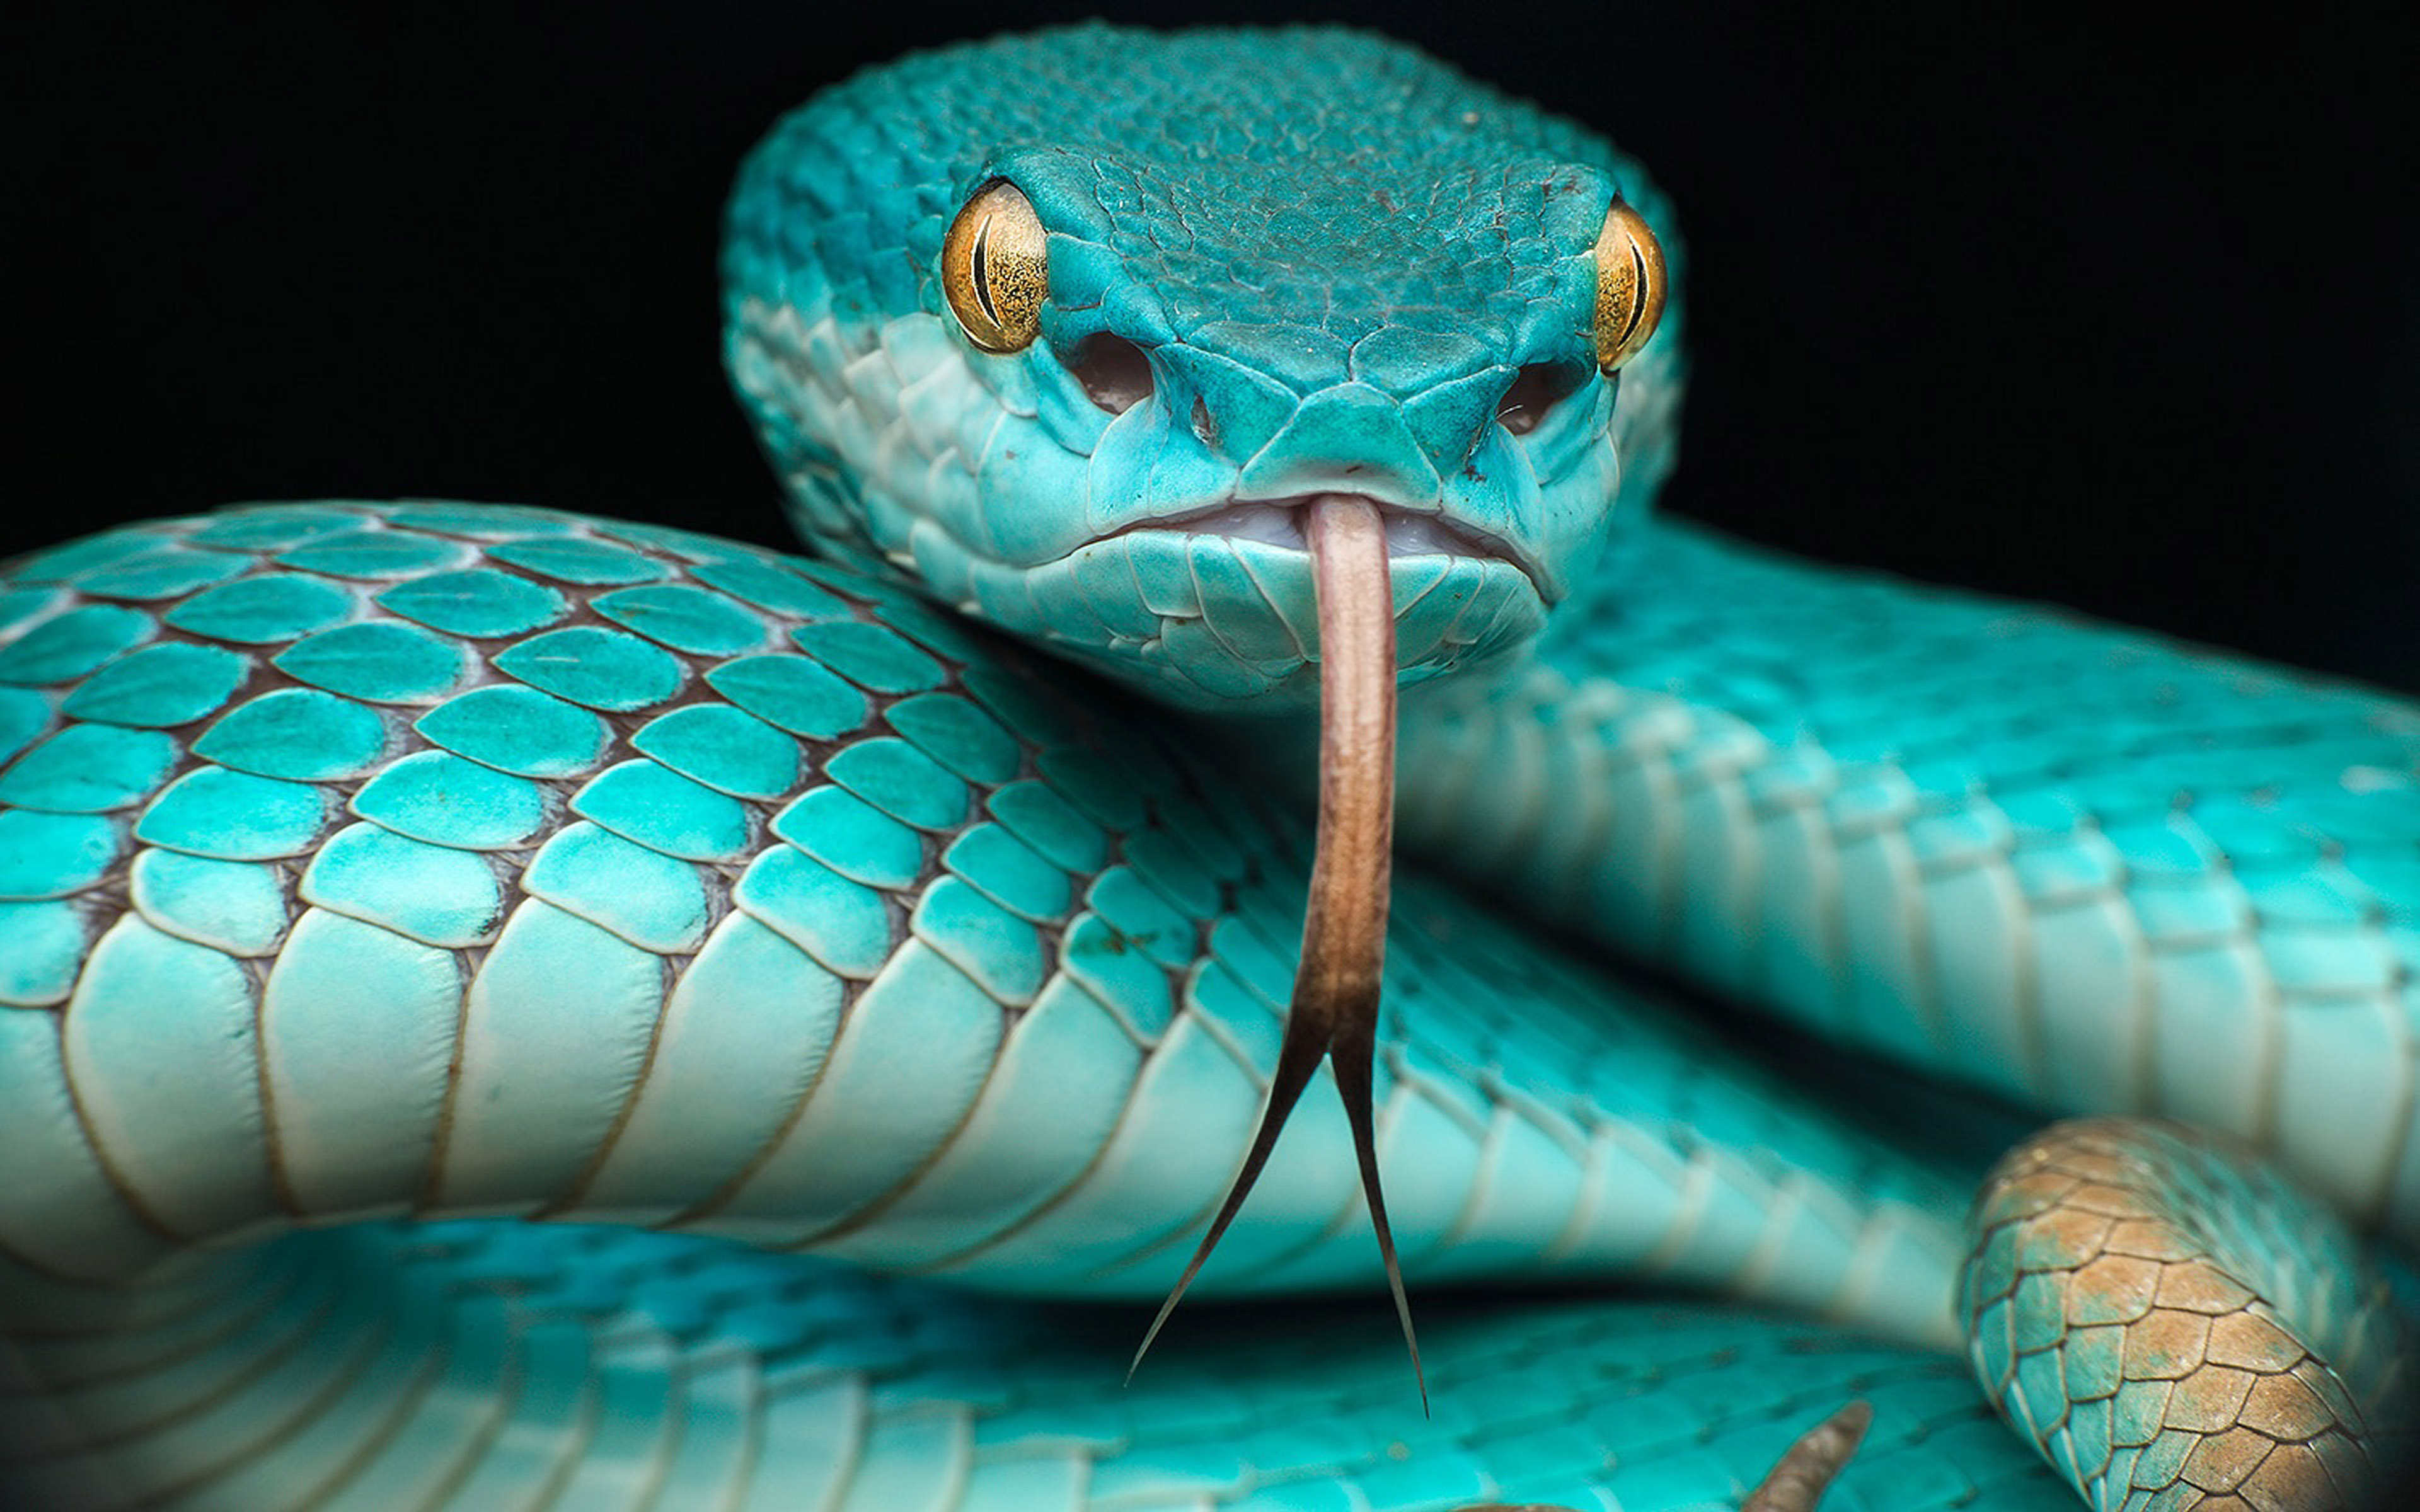 Trimeresurus Albolabris Insularis Reptile Japanese Blue Poison Snake In  Indonesia And East Timor Hd Wallpapers For Desktop Mobile Phones And Laptop  3840x2400 : 